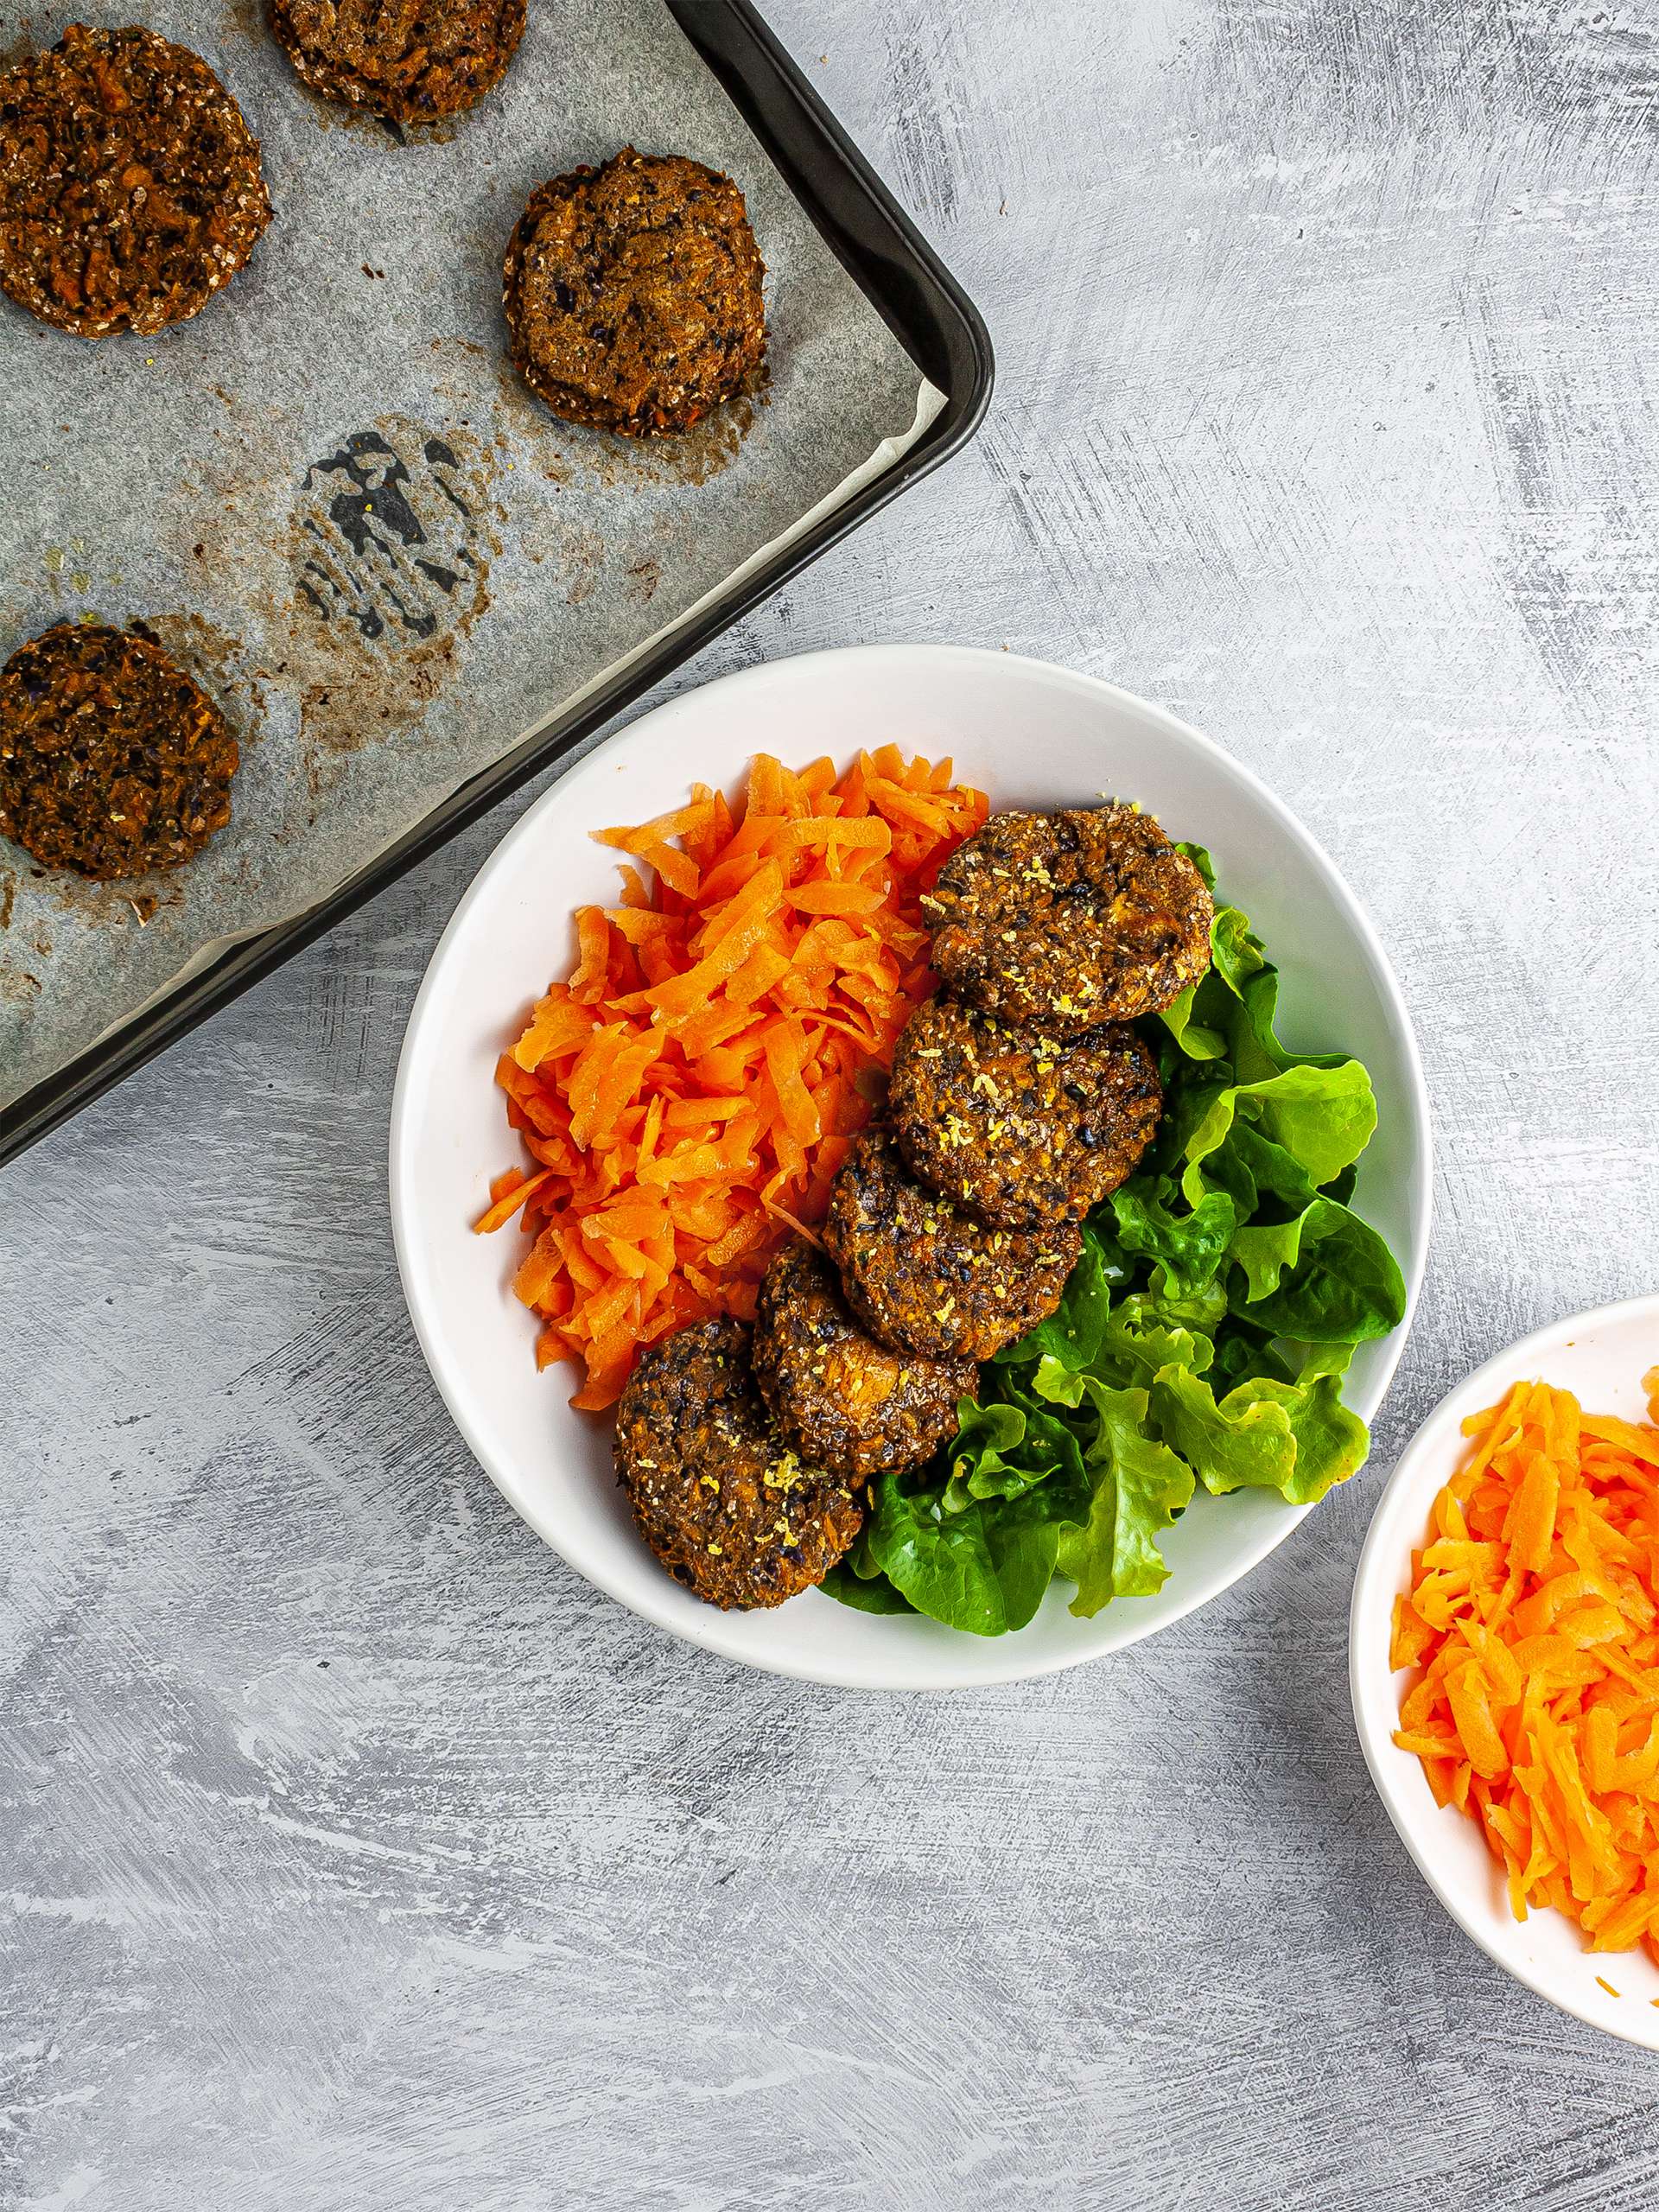 Baked falafels served with carrots and lettuce